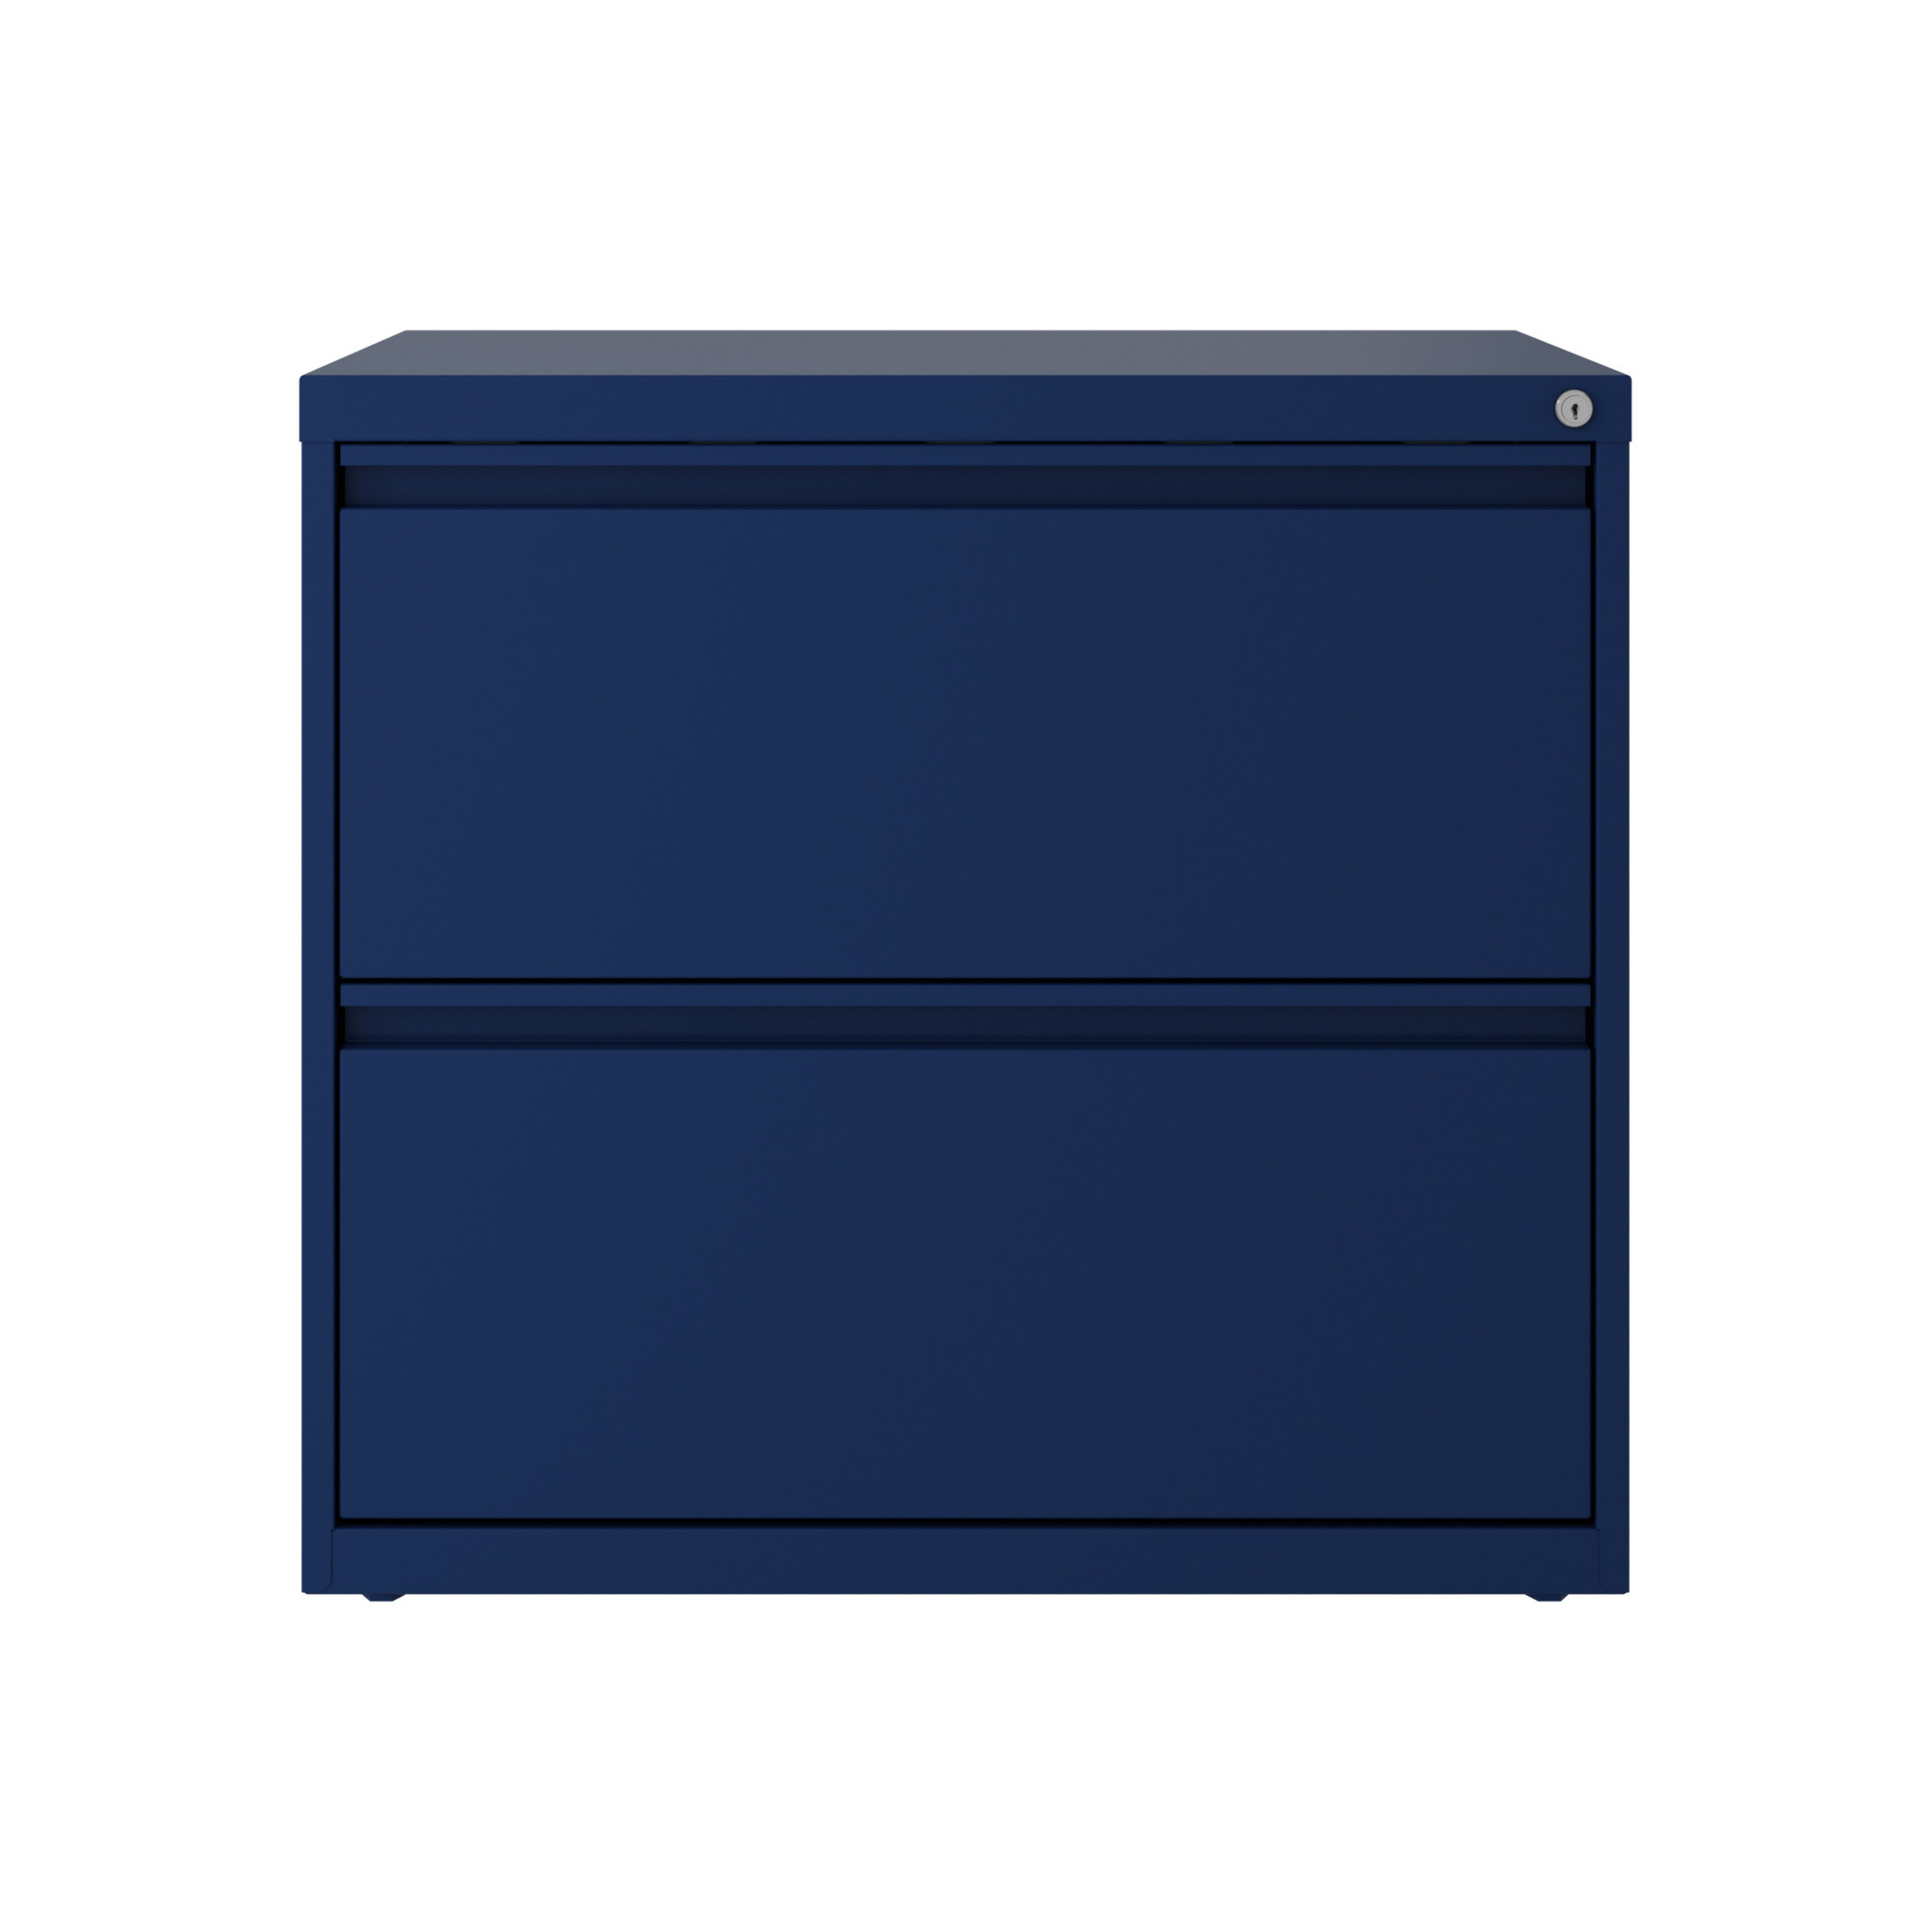 Hirsh Industries, 2 Drawer Lateral 101 File Cabinet, Width 30 in, Depth 17.63 in, Height 27.75 in, Model 24086